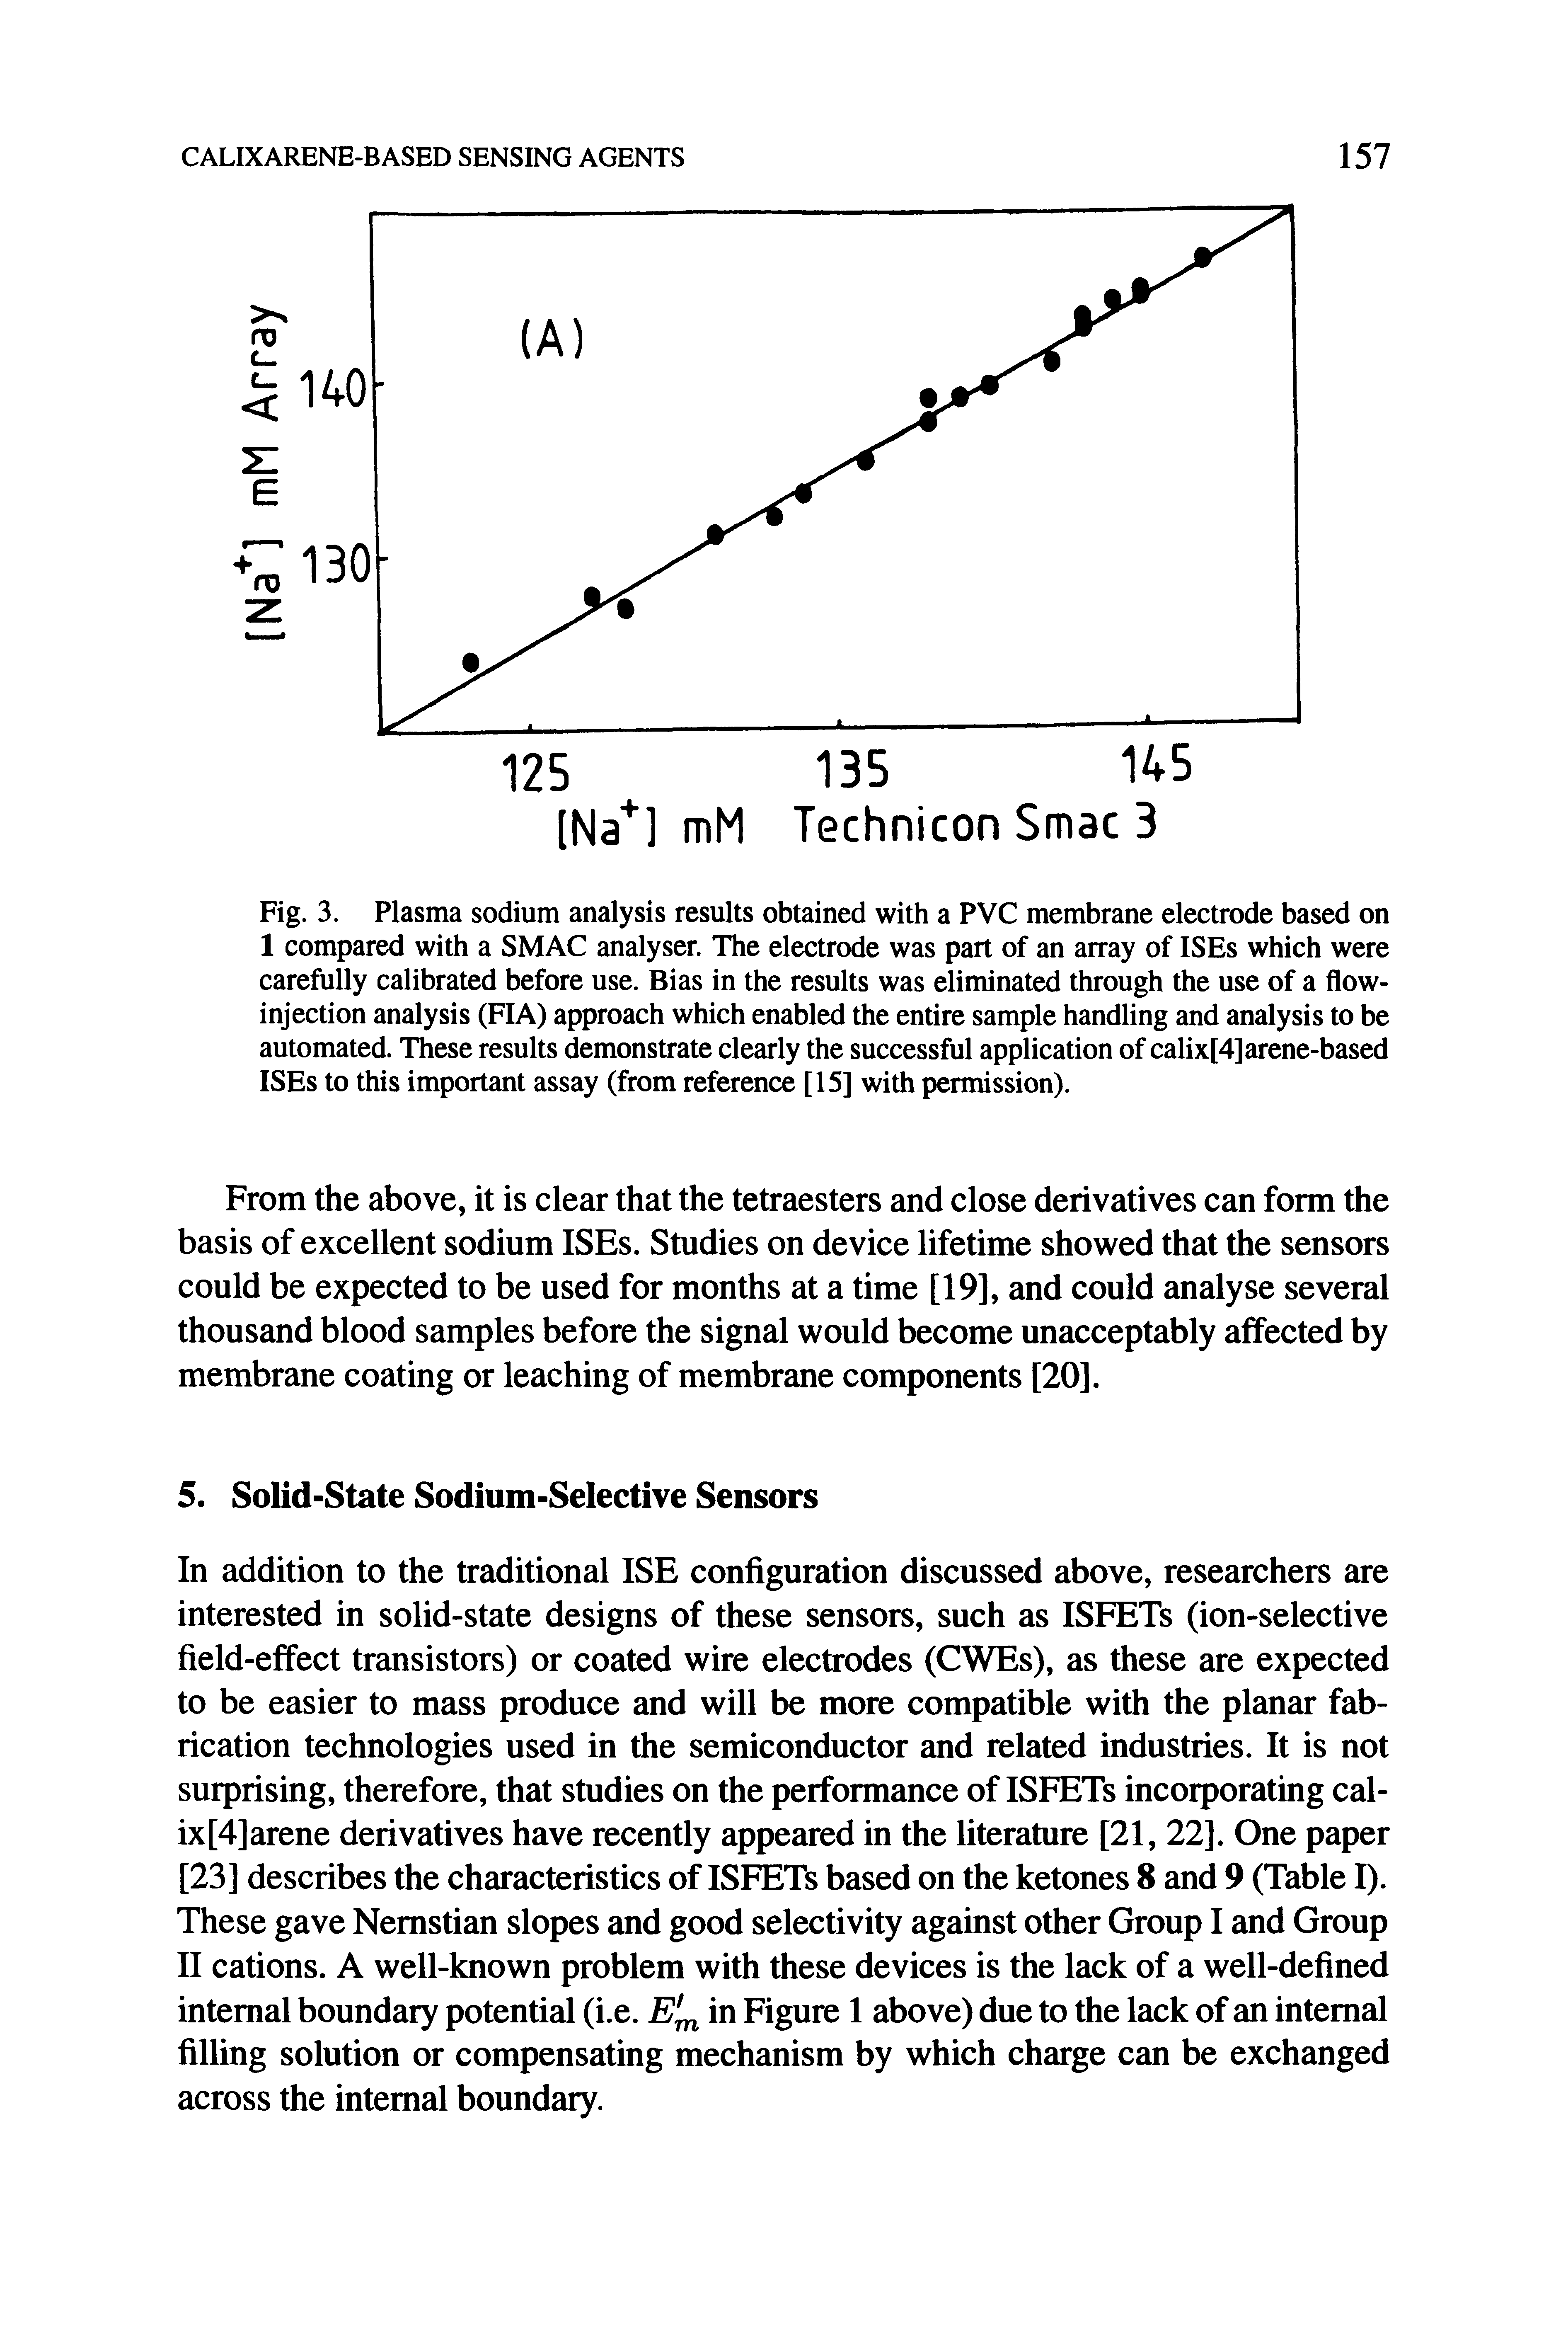 Fig. 3. Plasma sodium analysis results obtained with a PVC membrane electrode based on 1 compared with a SMAC analyser. The electrode was part of an array of ISEs which were carefully calibrated before use. Bias in the results was eliminated through the use of a flow-injection analysis (FIA) approach which enabled the entire sample handling and analysis to be automated. These results demonstrate clearly the successful application of calix[4]arene-based ISEs to this important assay (from reference [15] with permission).